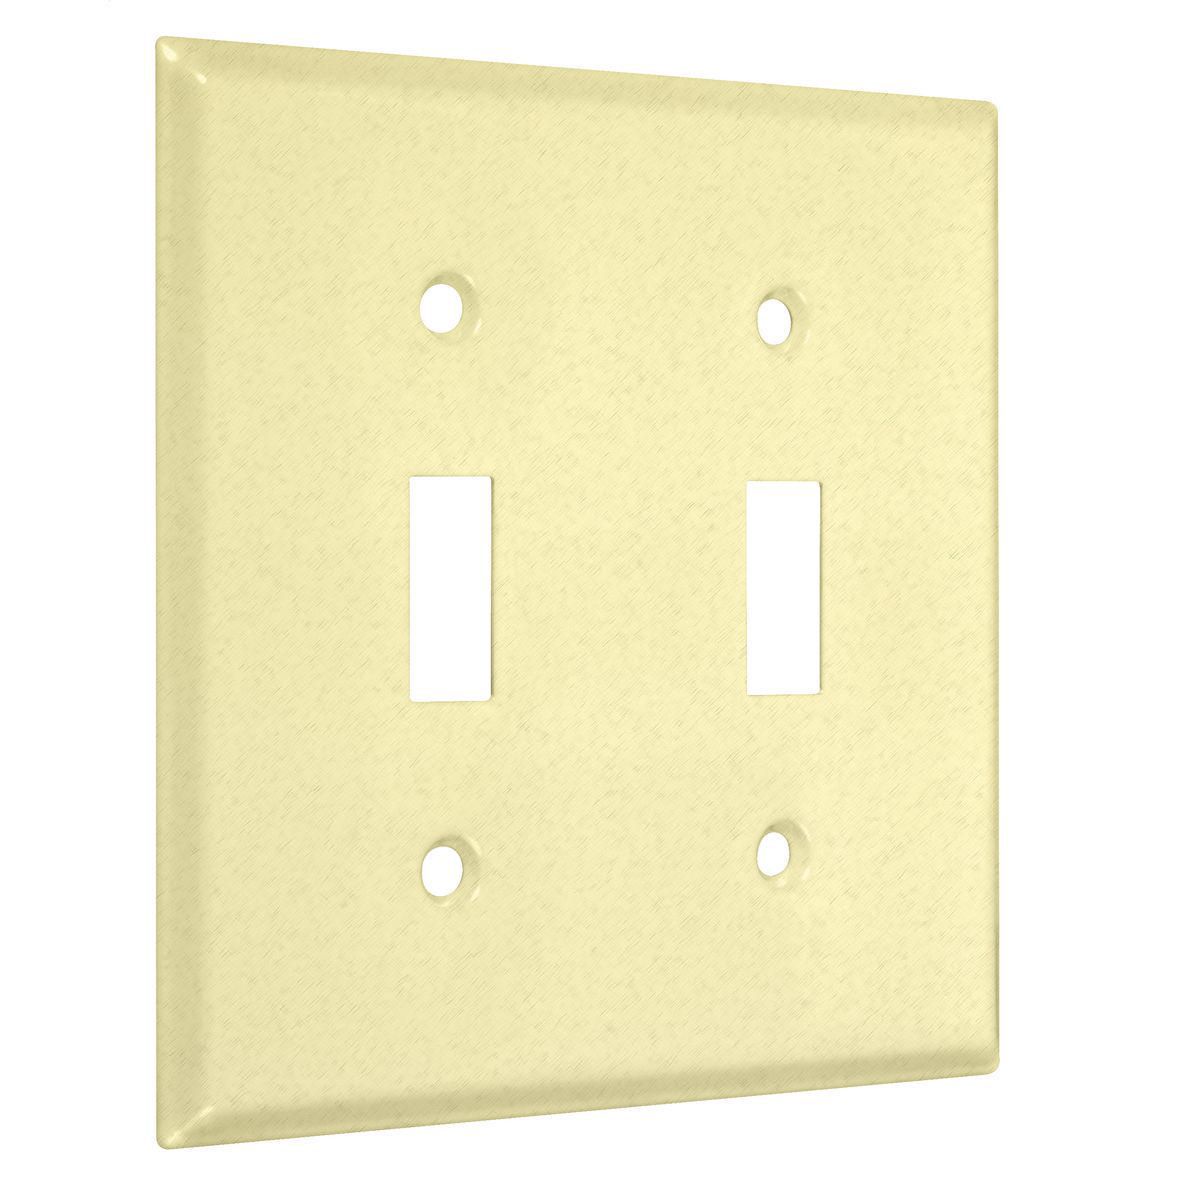 2G STANDARD (2) TOGGLE IVORY TEXTURED